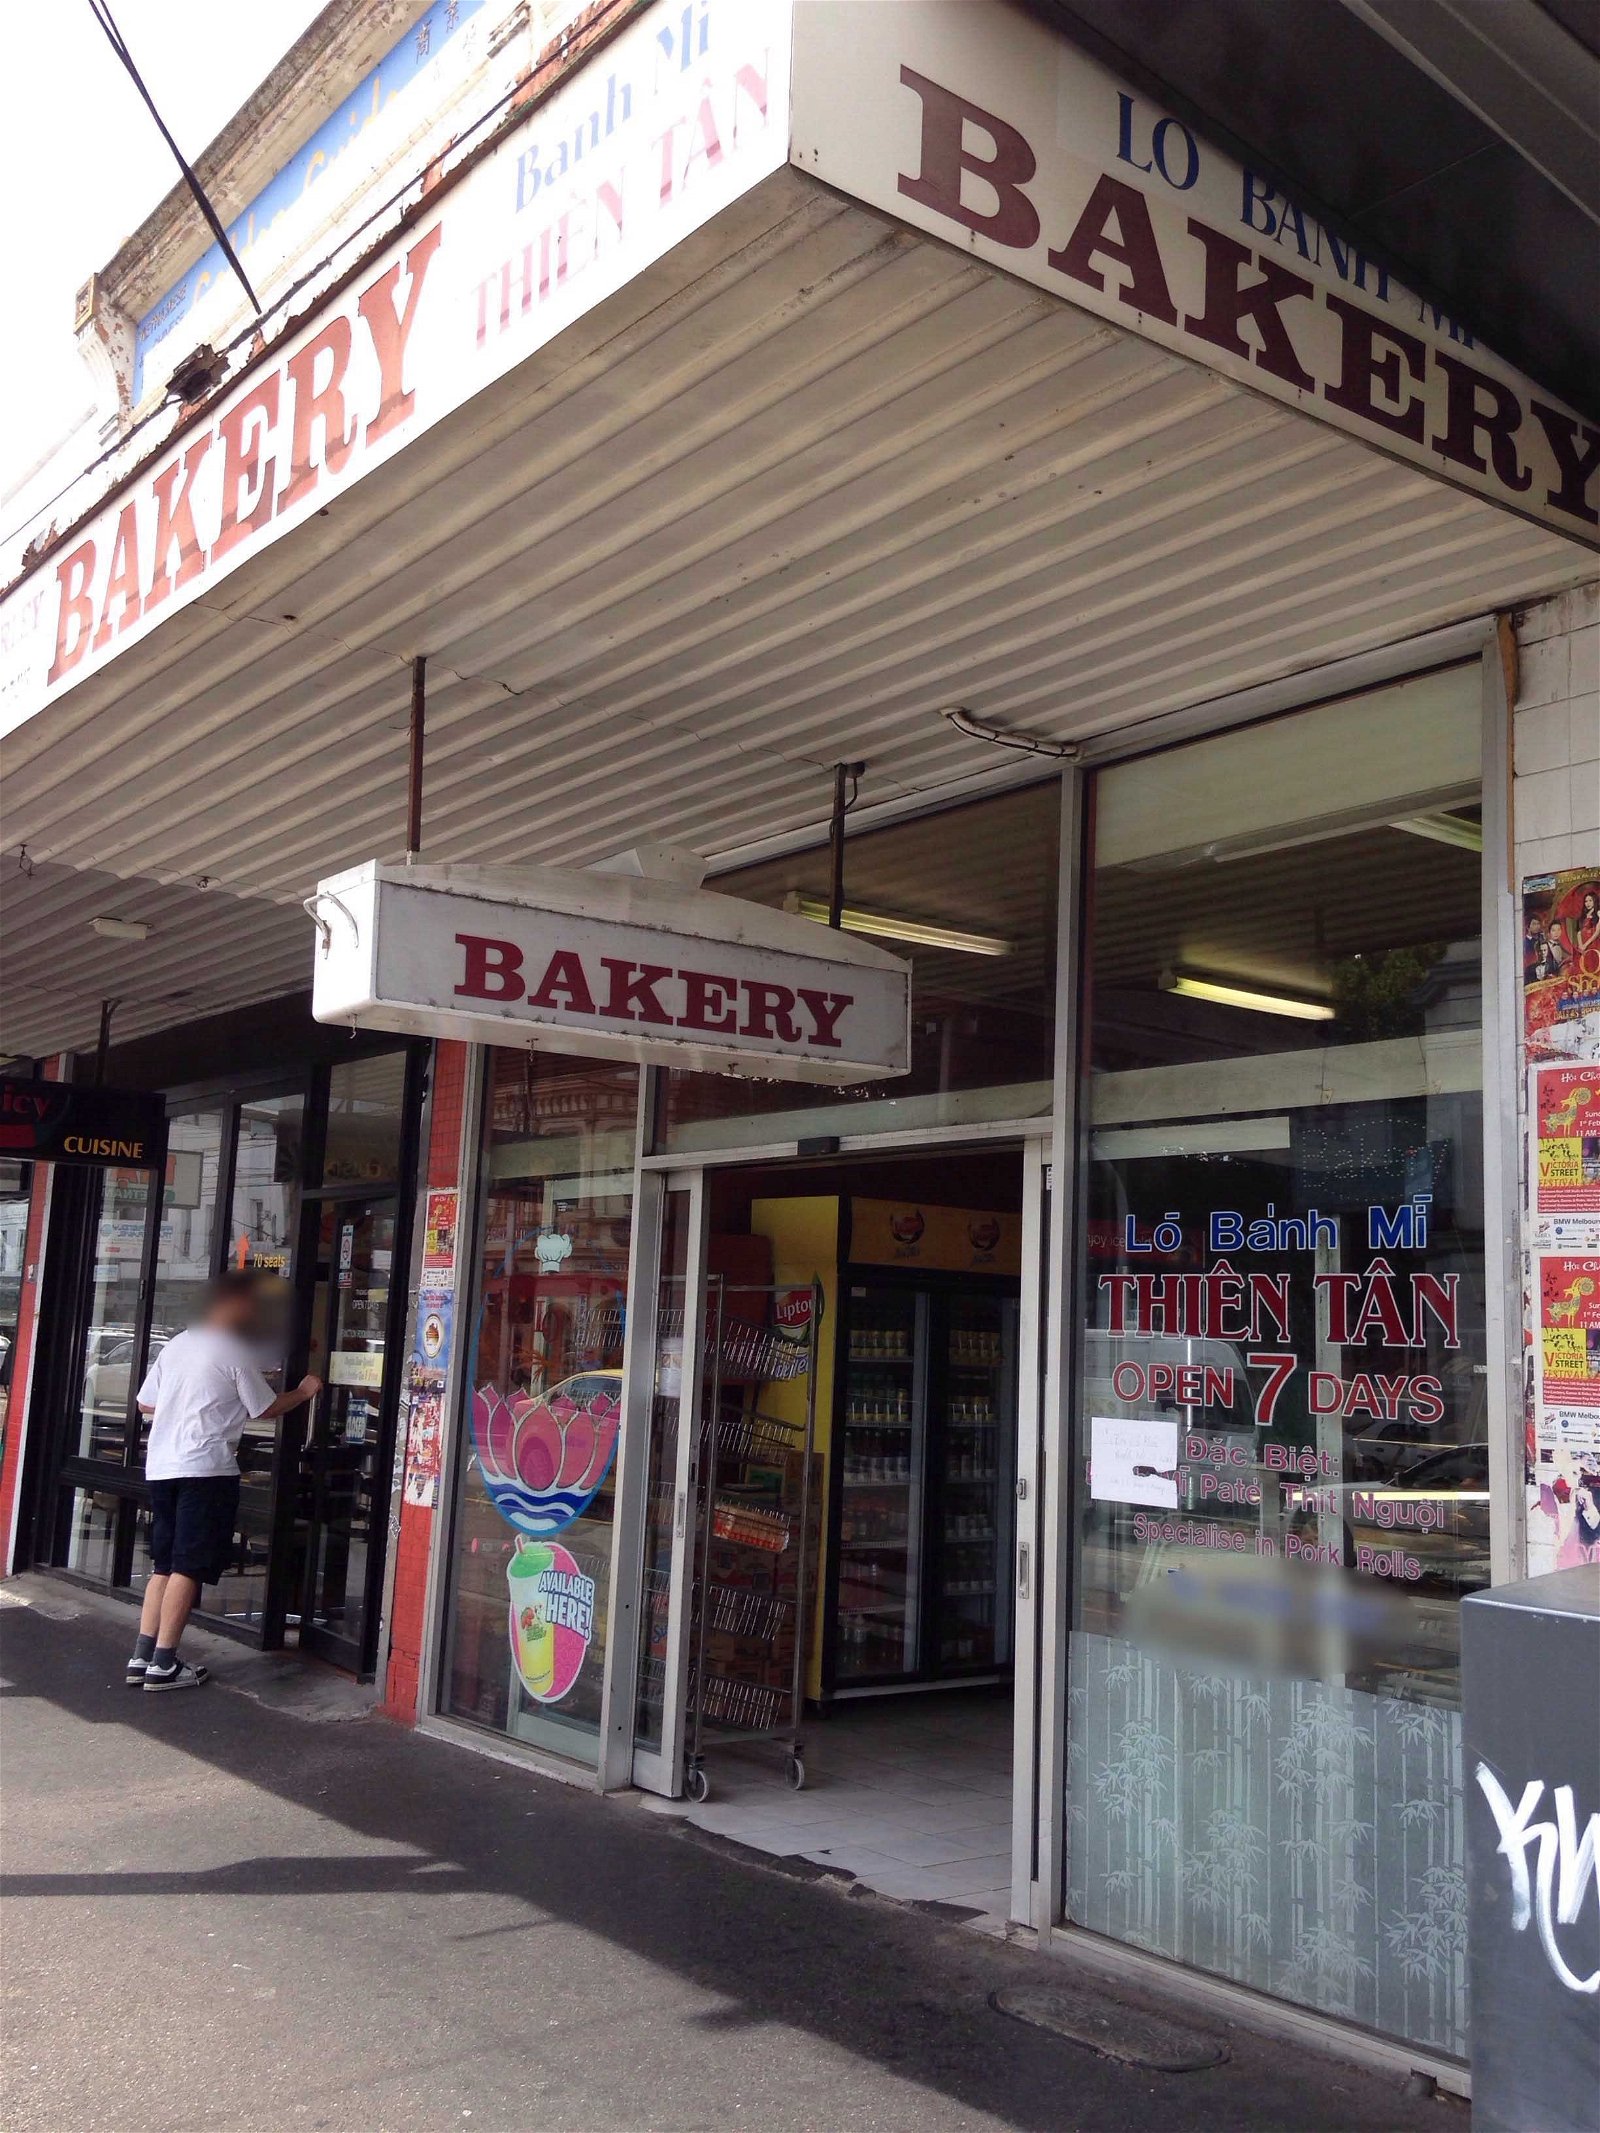 Harley Bakery - Broome Tourism